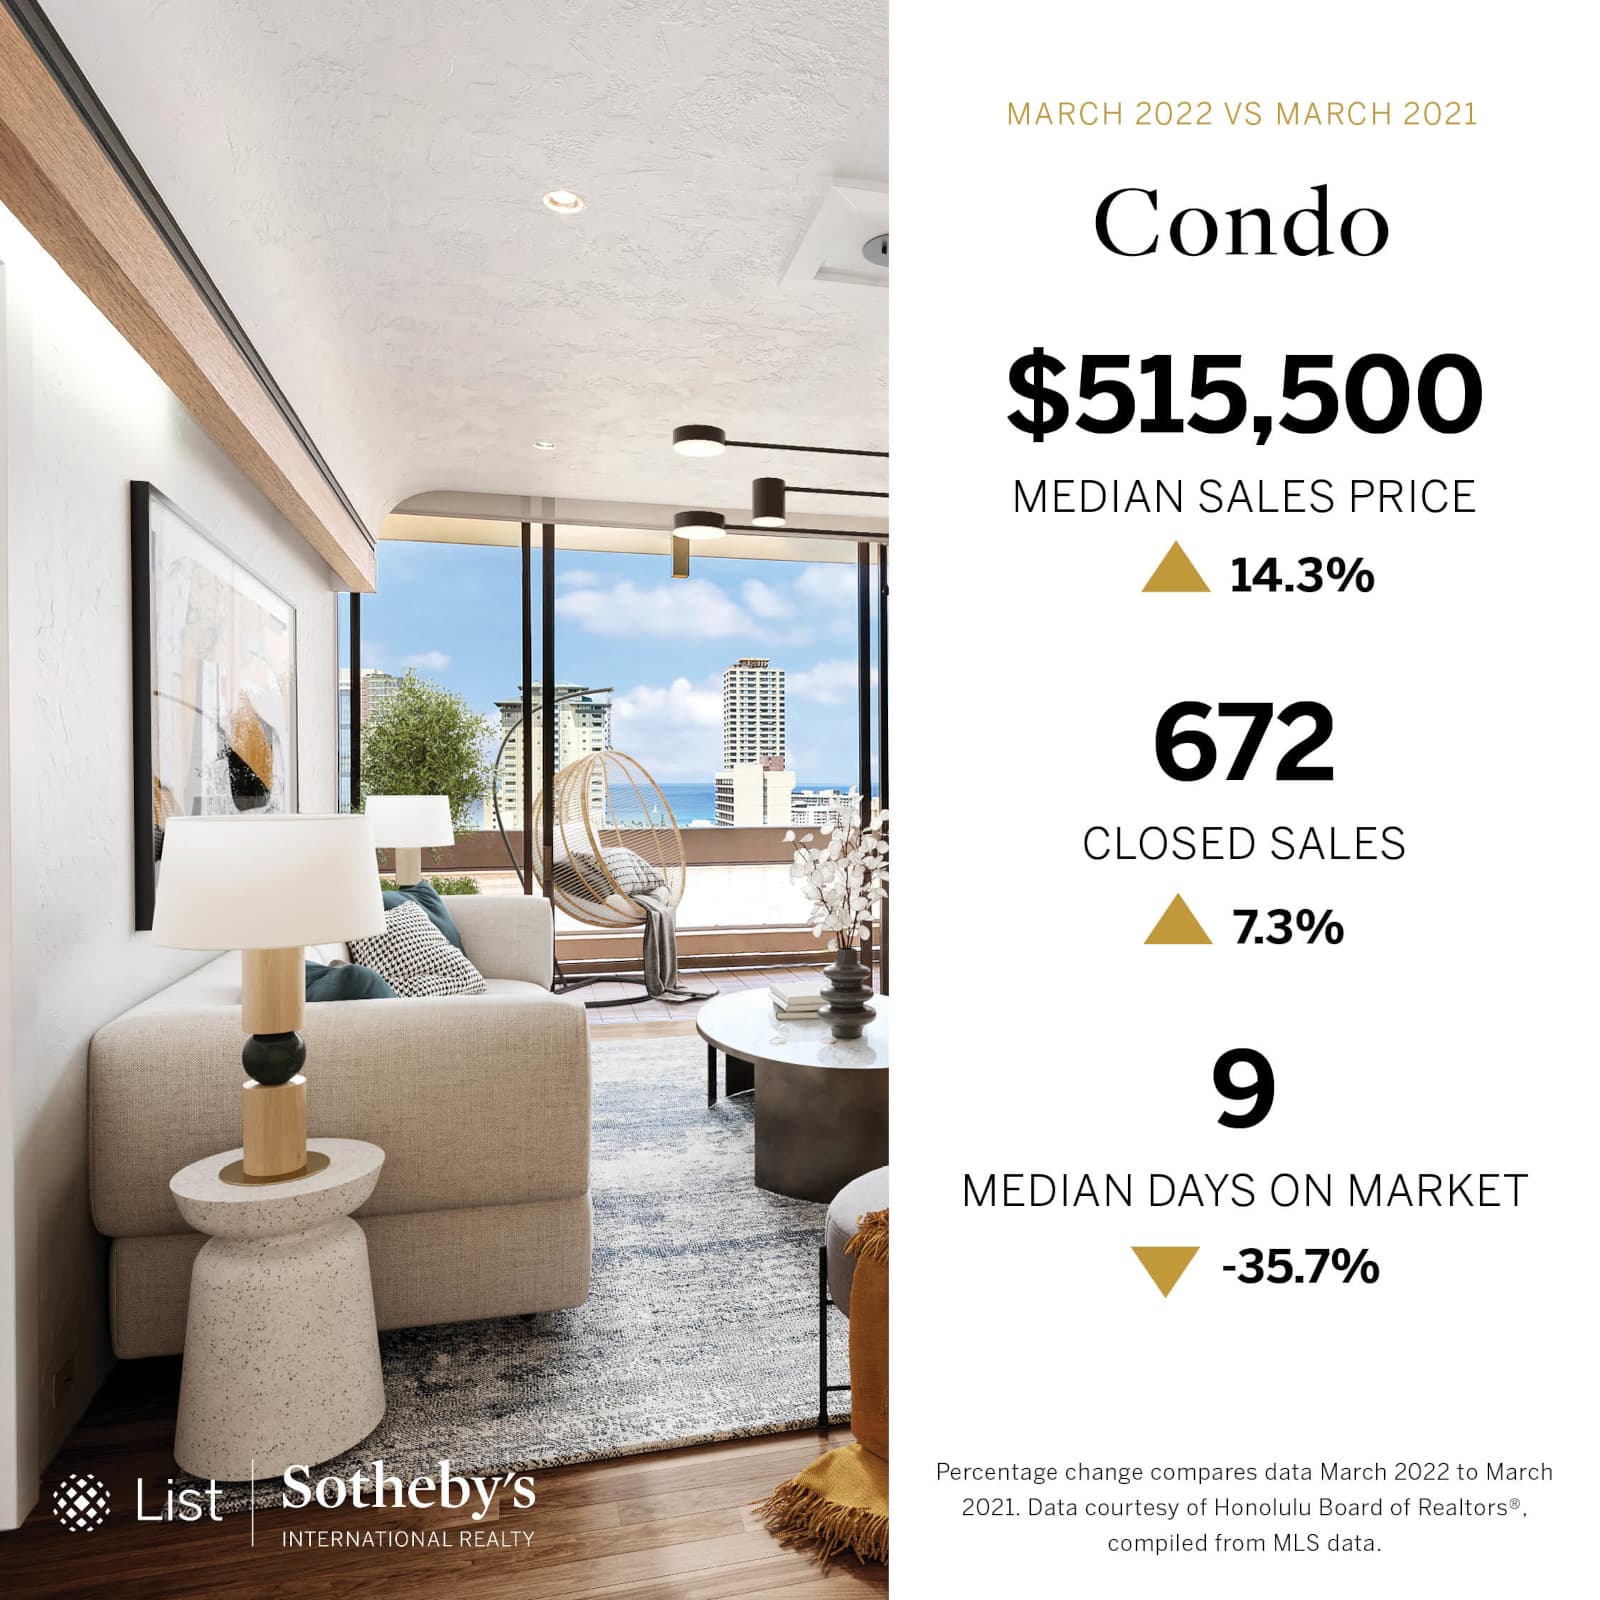 A living area in a condo tower with a view of nearby towers, with condo market stats overlaid on a field of white on the right side 